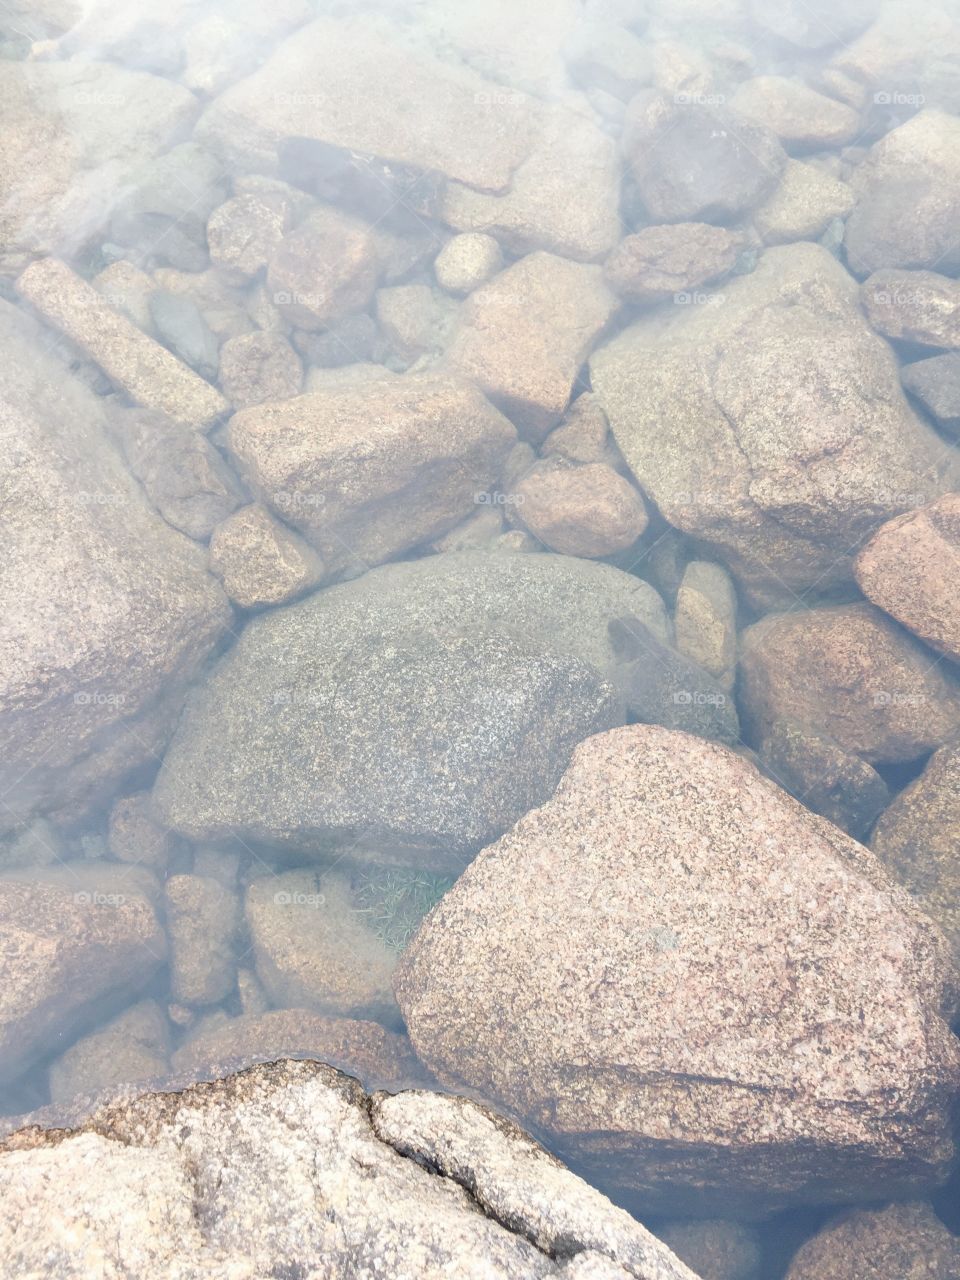 That clear water is so beautiful. 